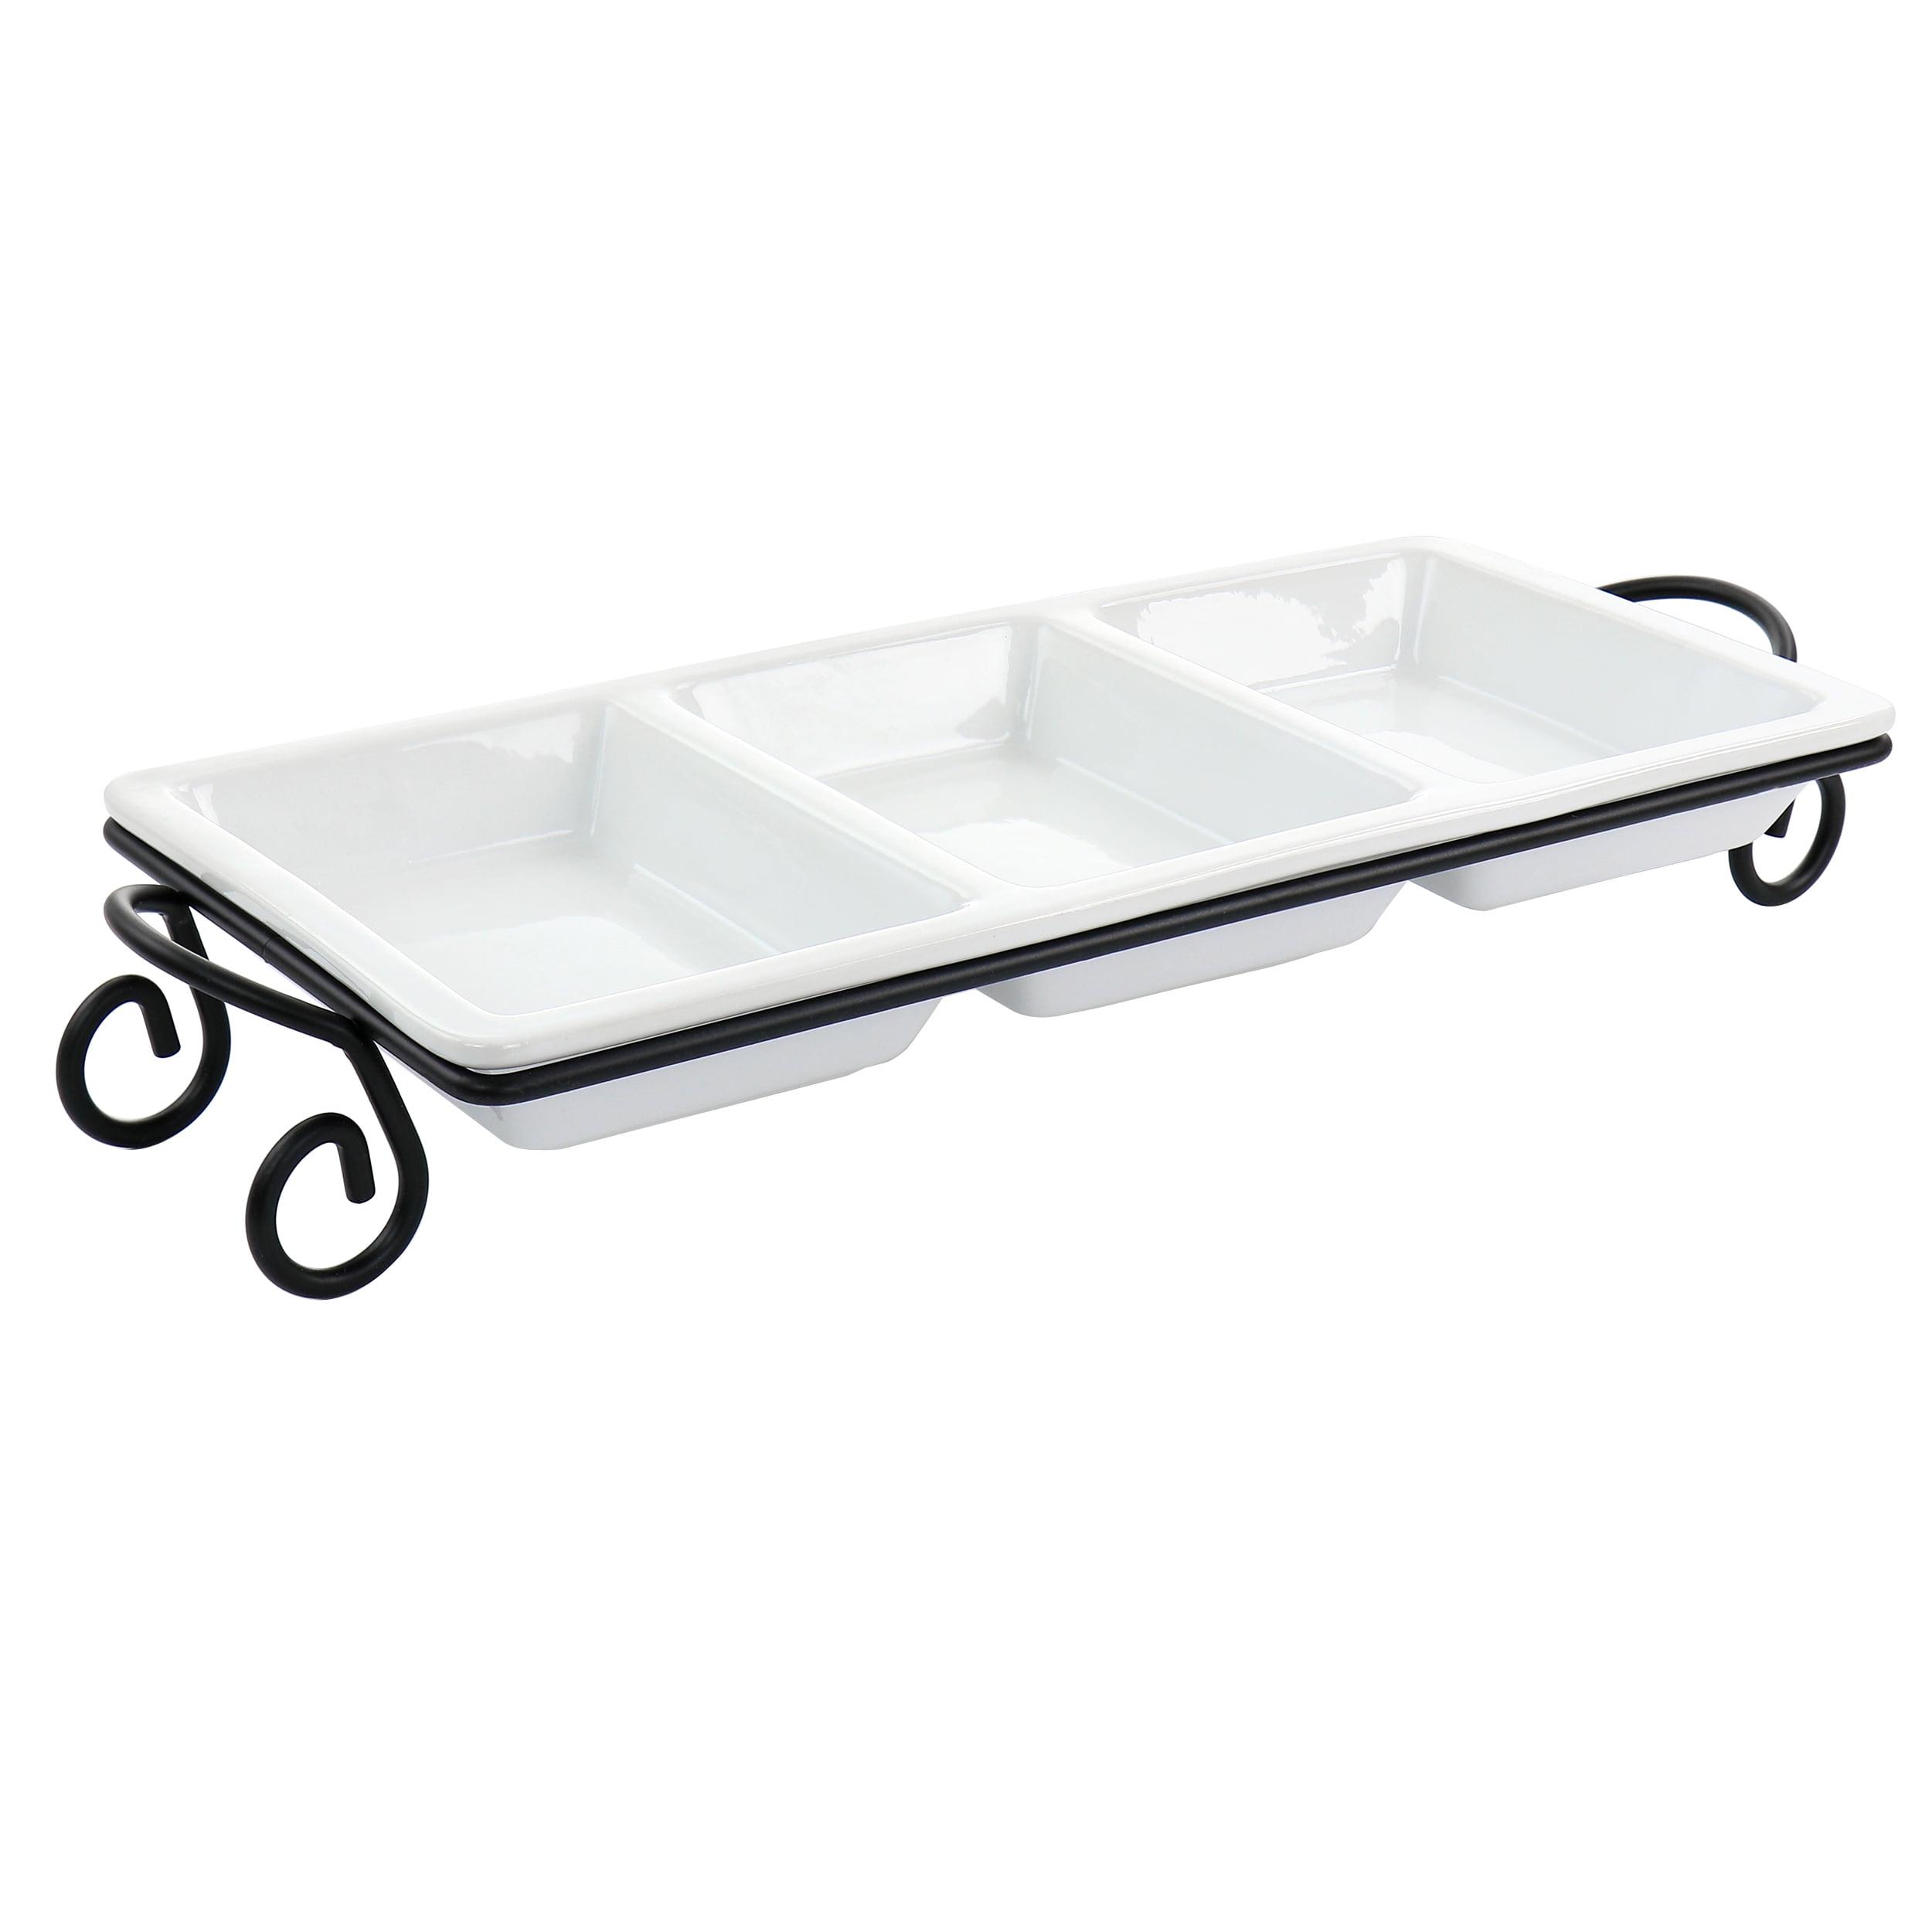 Modern White Porcelain 3-Section Rectangular Serving Tray with Metal Rack